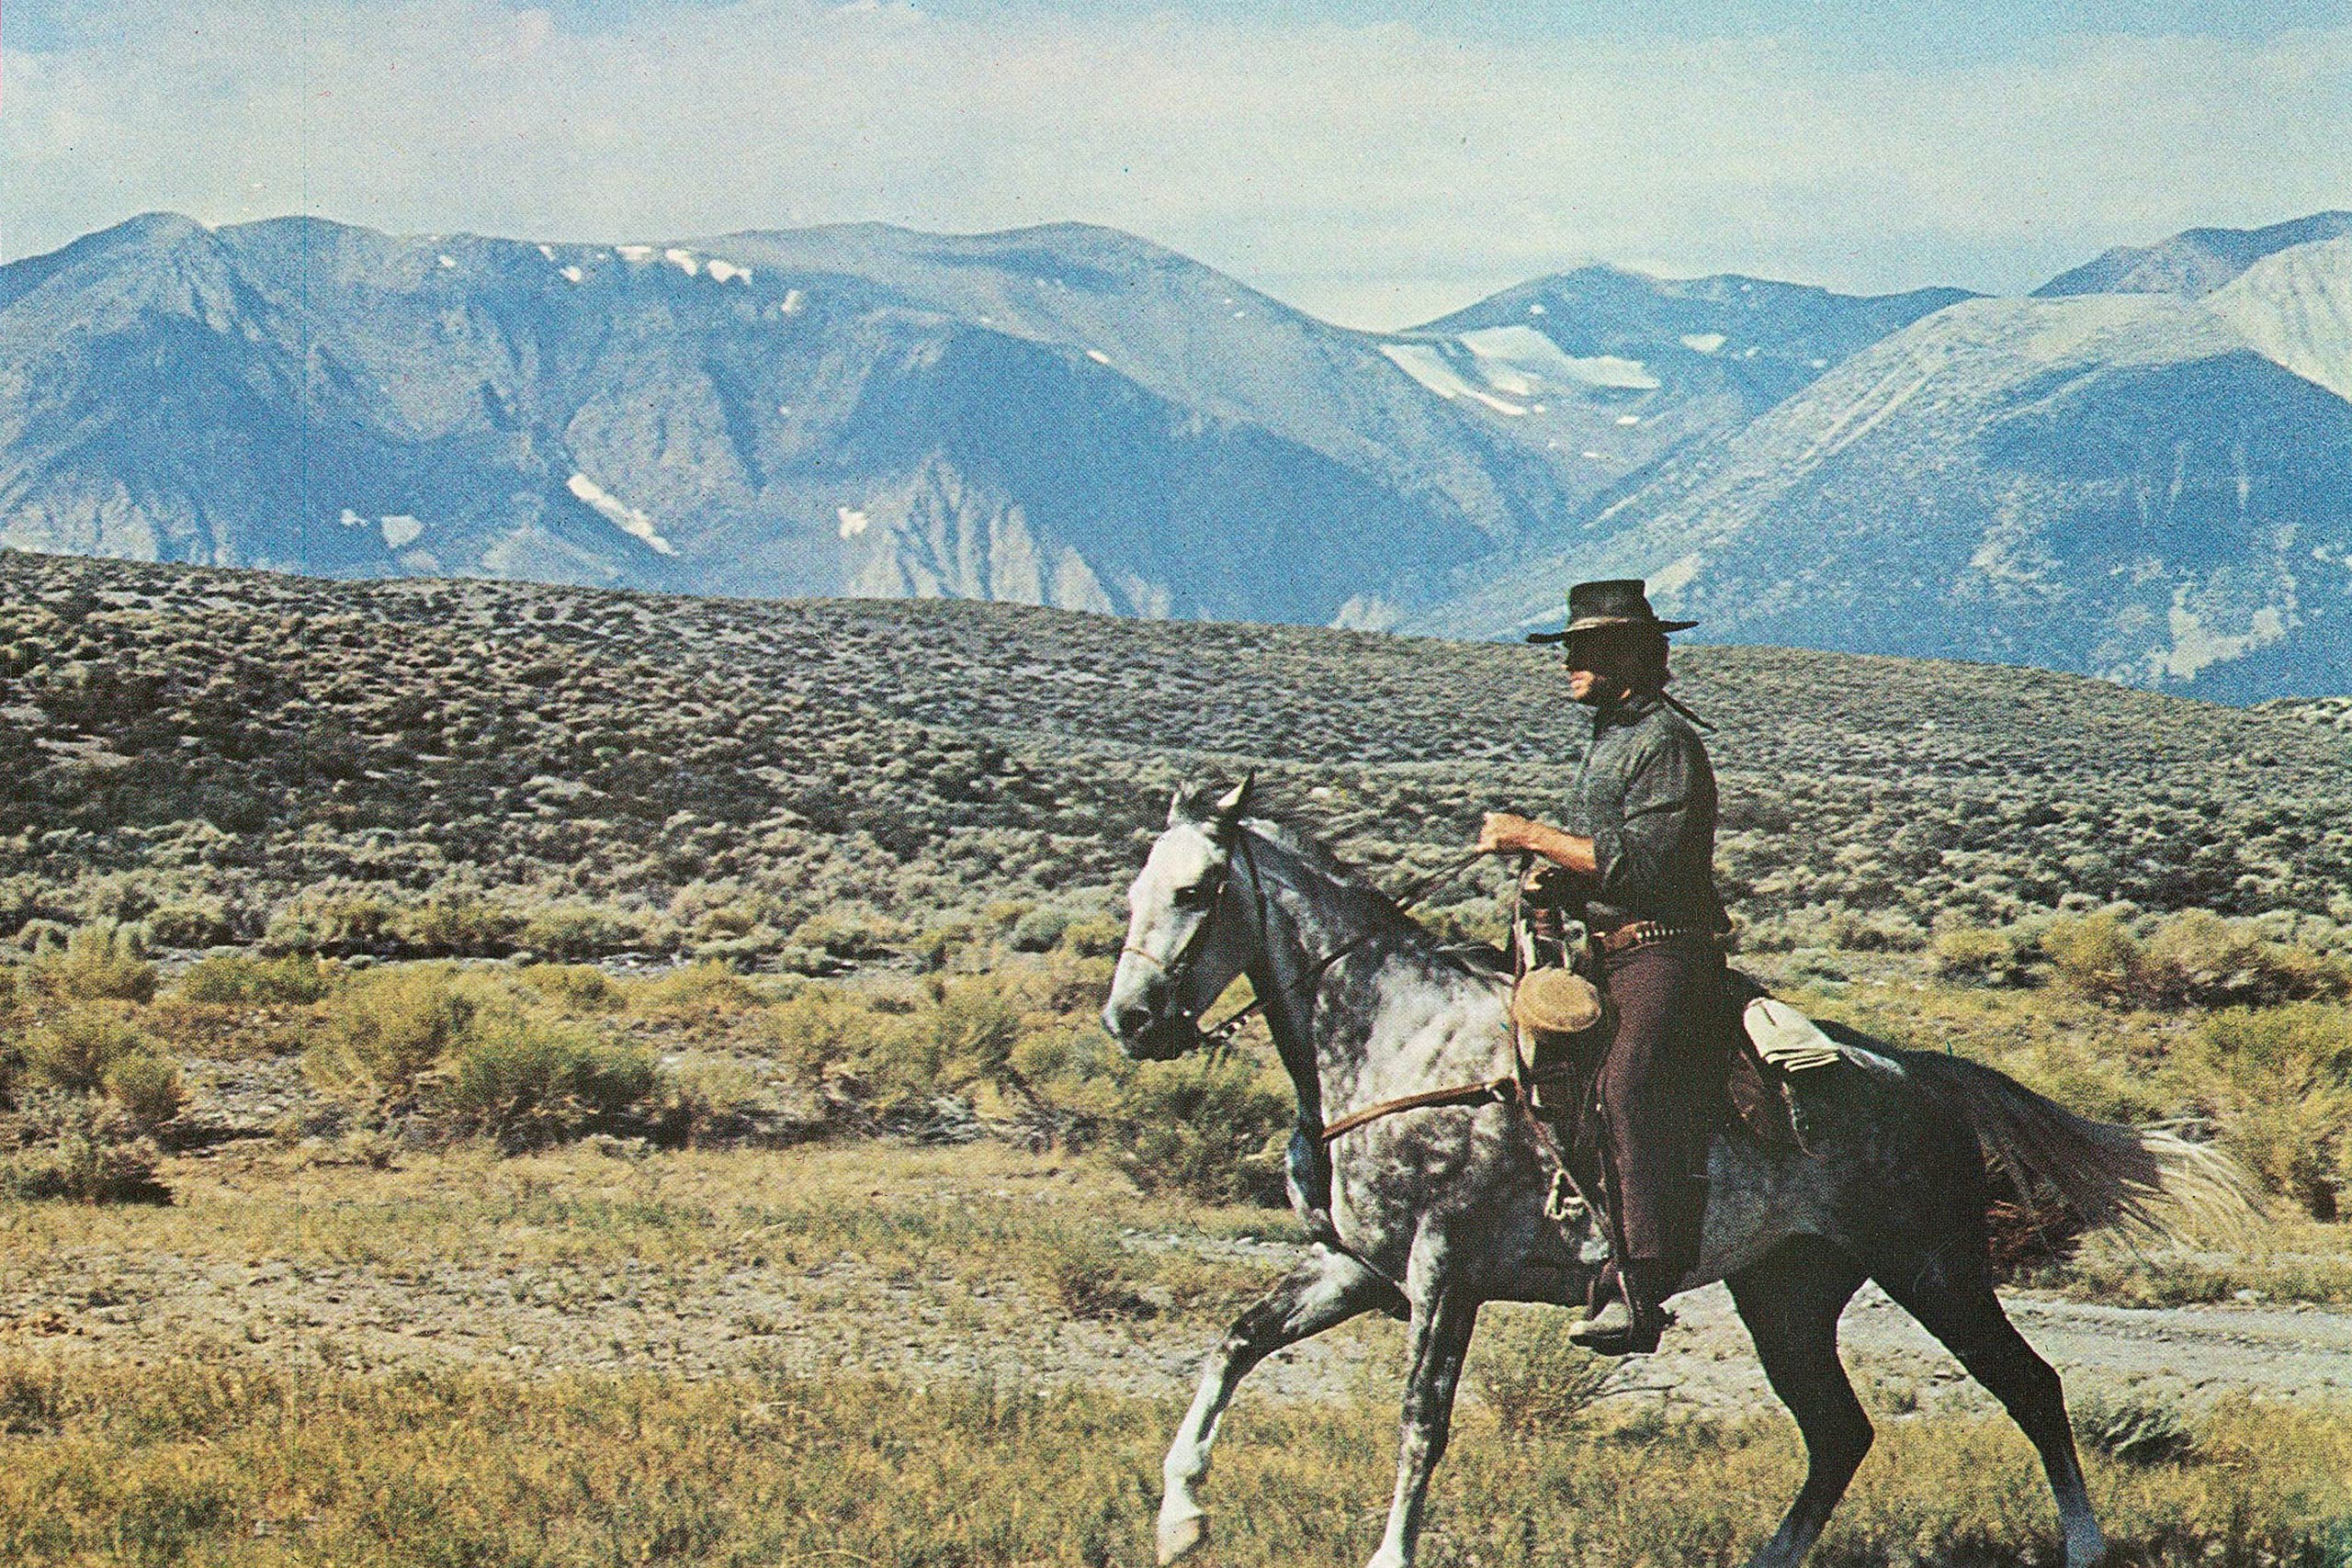 High Plains Drifter, 1973 Ernest Tidyman, who in 1971 had written the seminal urban-cop movies The French Connection (winning an Oscar) and Shaft), penned Eastwood's first Western that he directed as well as starred in. This time he really is a man with no name — he may be a ghost gunman, or a vindictive Jesus — with a wild metaphorical streak: he forces the locals to paint the town red and rename the place Hell.  Part of the time The Stranger is Dirty Harry in cowboy boots, a good cop trying to do his duty in a world ungrateful for his sadistic efforts,  wrote Richard Schickel in TIME.  Part of the time he is Christ reincarnated; in another life (a recurring dream informs us), he suffered a version of Calvary inflicted on him by this very town.  After dismissing Eastwood as a galoot with troglodyte political tendencies and too much power, the critics began perking up to Eastwood, as a director and actor, with this mean, majestic parable.